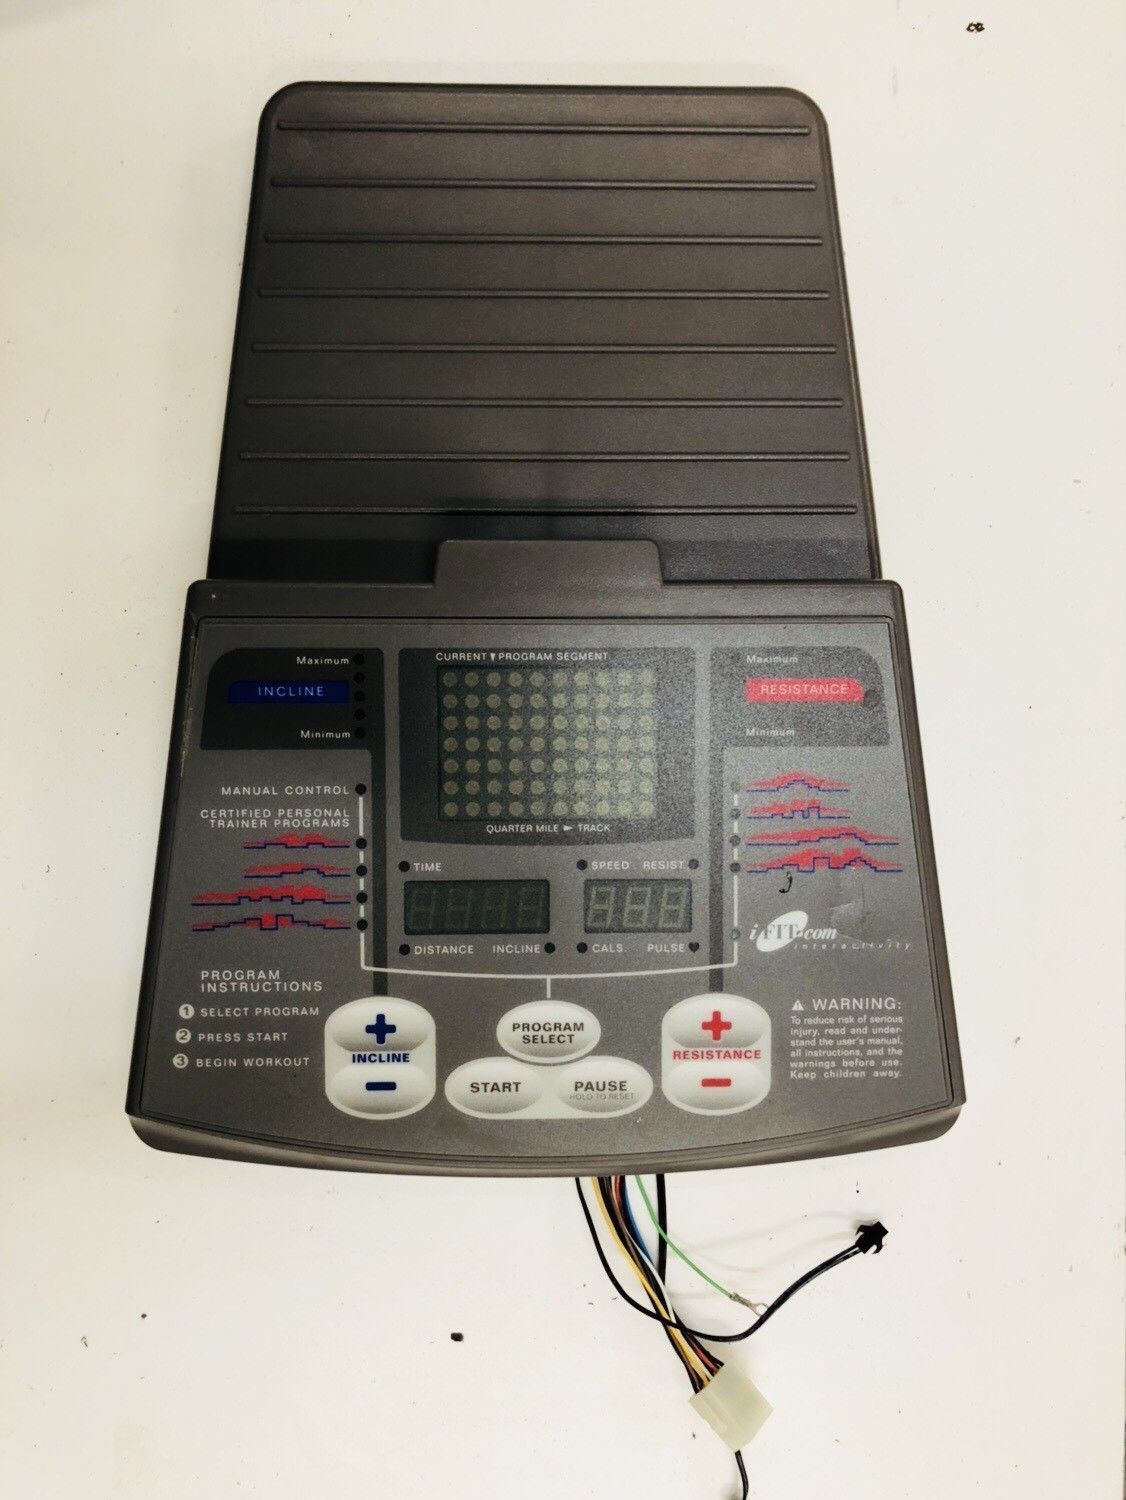 Reebok Icon REL 8 Elliptical Console Overlay Display Control Panel elrb1290 (Used)